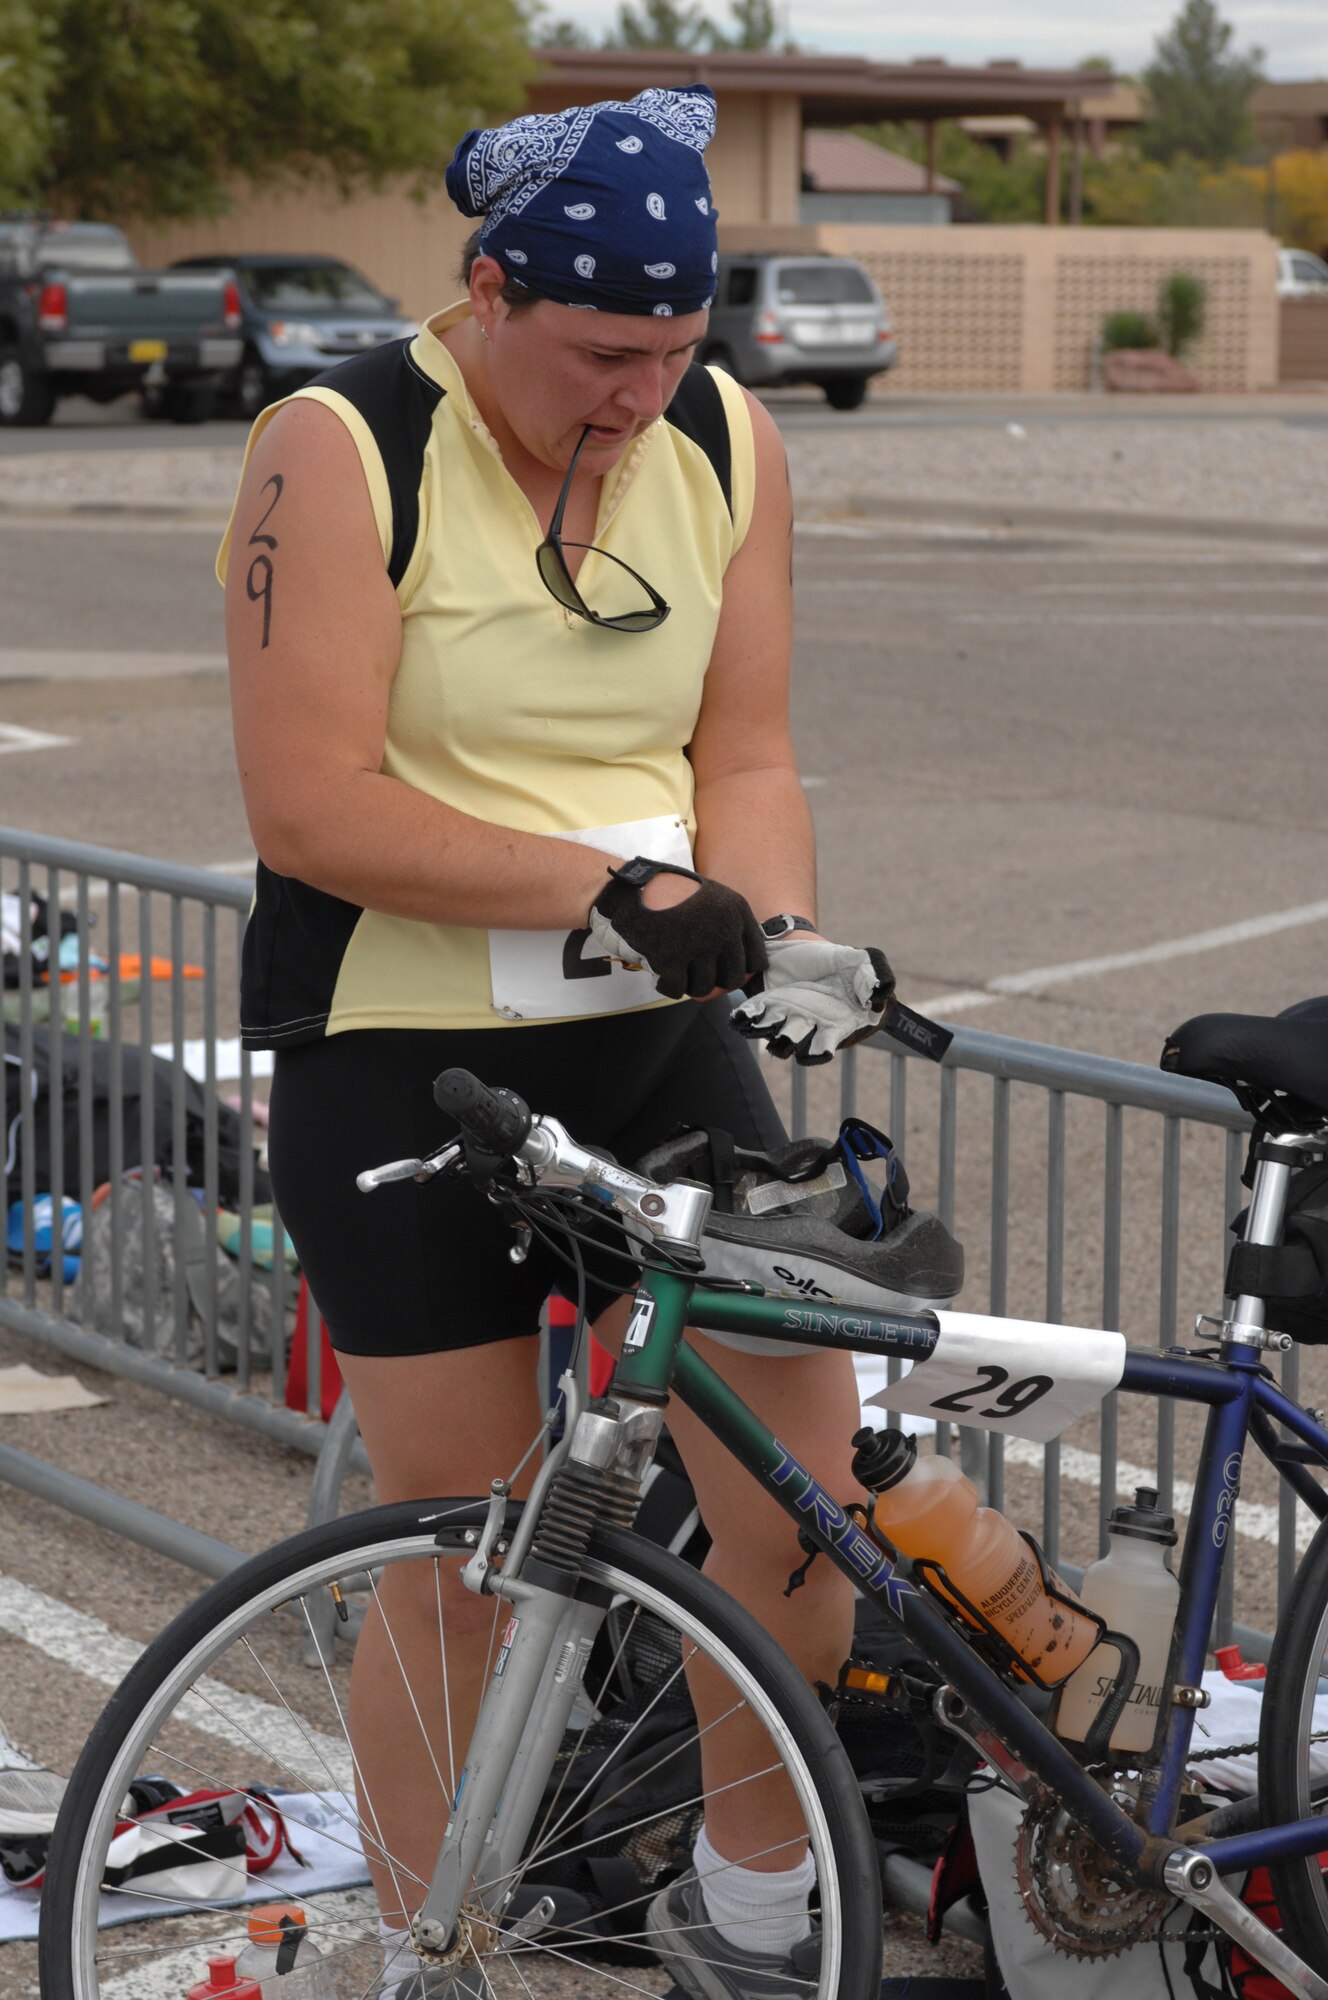 Alexandria Sanchez, an athlete in the Triathlon, puts on her gloves after finishing a 5K run and prepares for the 30K bike ride at the Aquatic Center at Holloman Air Force Base, N.M., October 12. The annual Triathlon was open to everyone who signed up and more than 60 athletes participated. (U.S. Air Force photo/Airman Sondra M. Escutia)